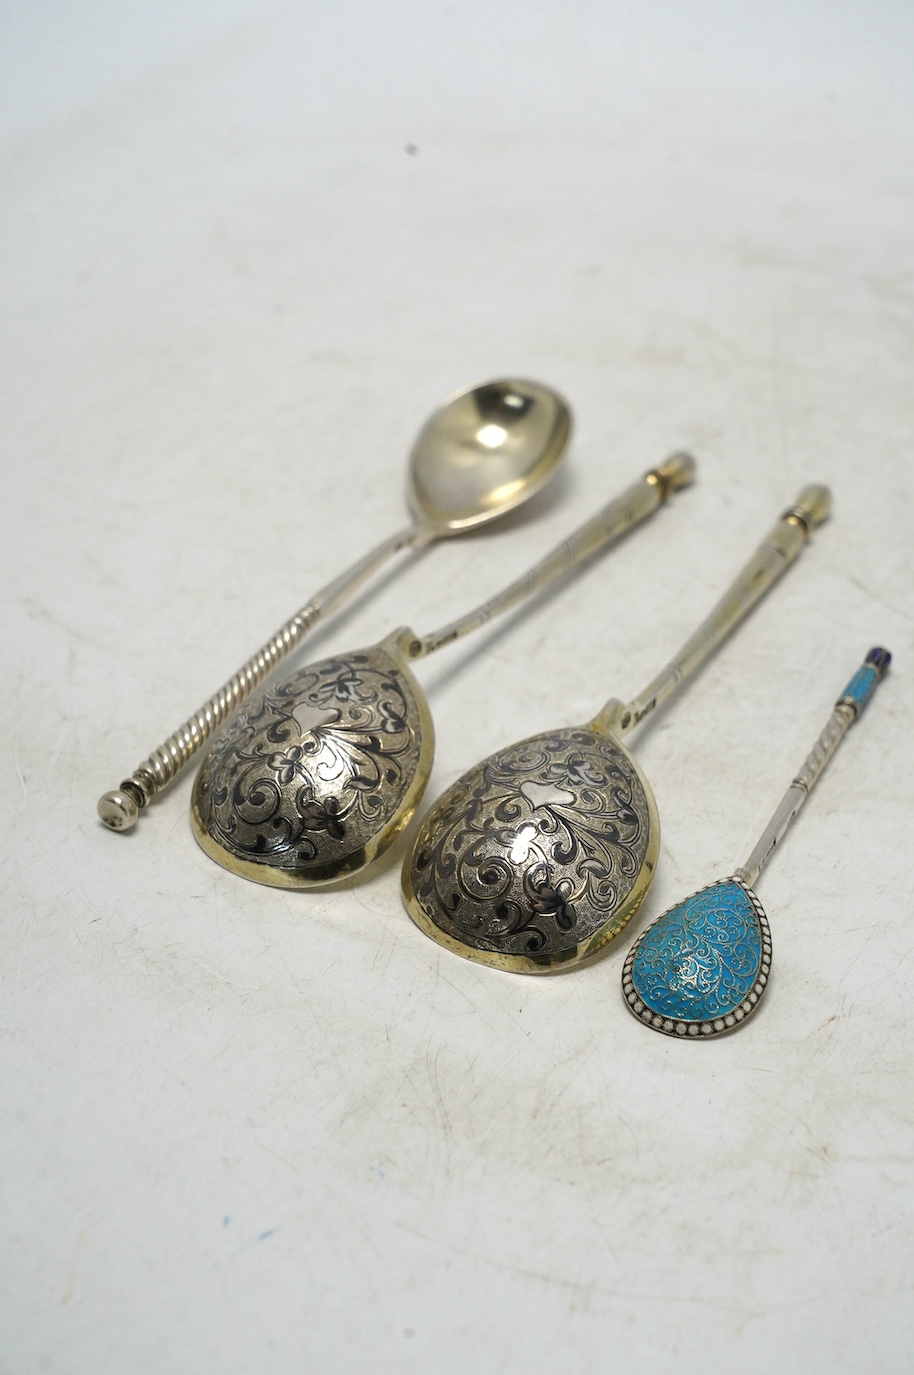 A pair of 19th century Russian 84 zolotnik and niello spoons, 15.5cm and two other Russian spoons including small spoon with cloisonné enamel. Condition - poor to fair